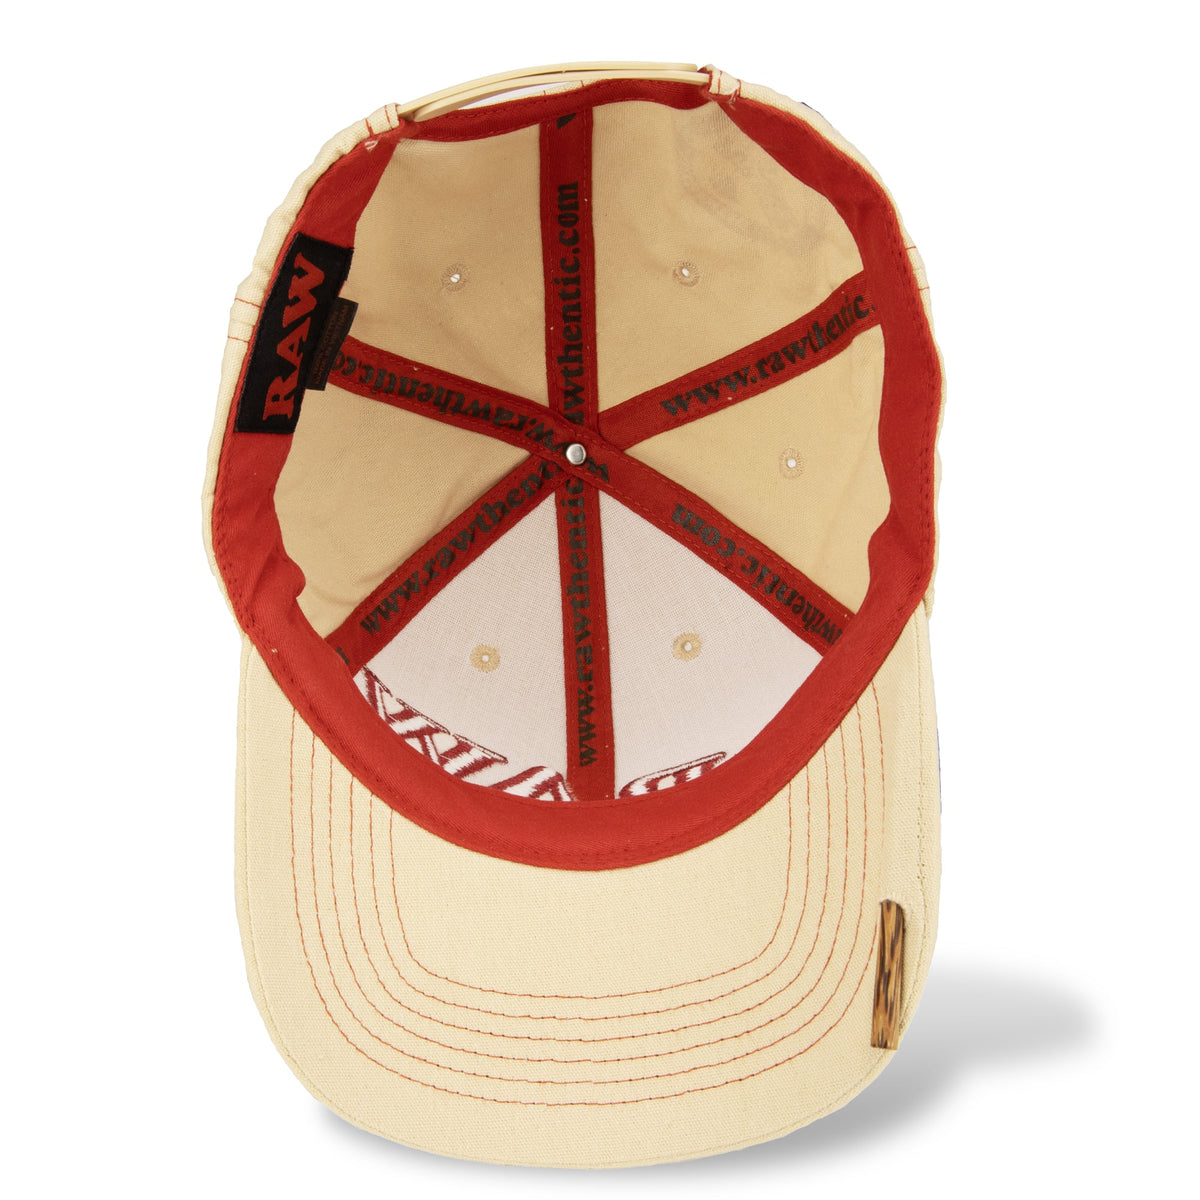 RAW Classic Tan Hat Clothing Accessories RAWU-APAA-0013 esd-official